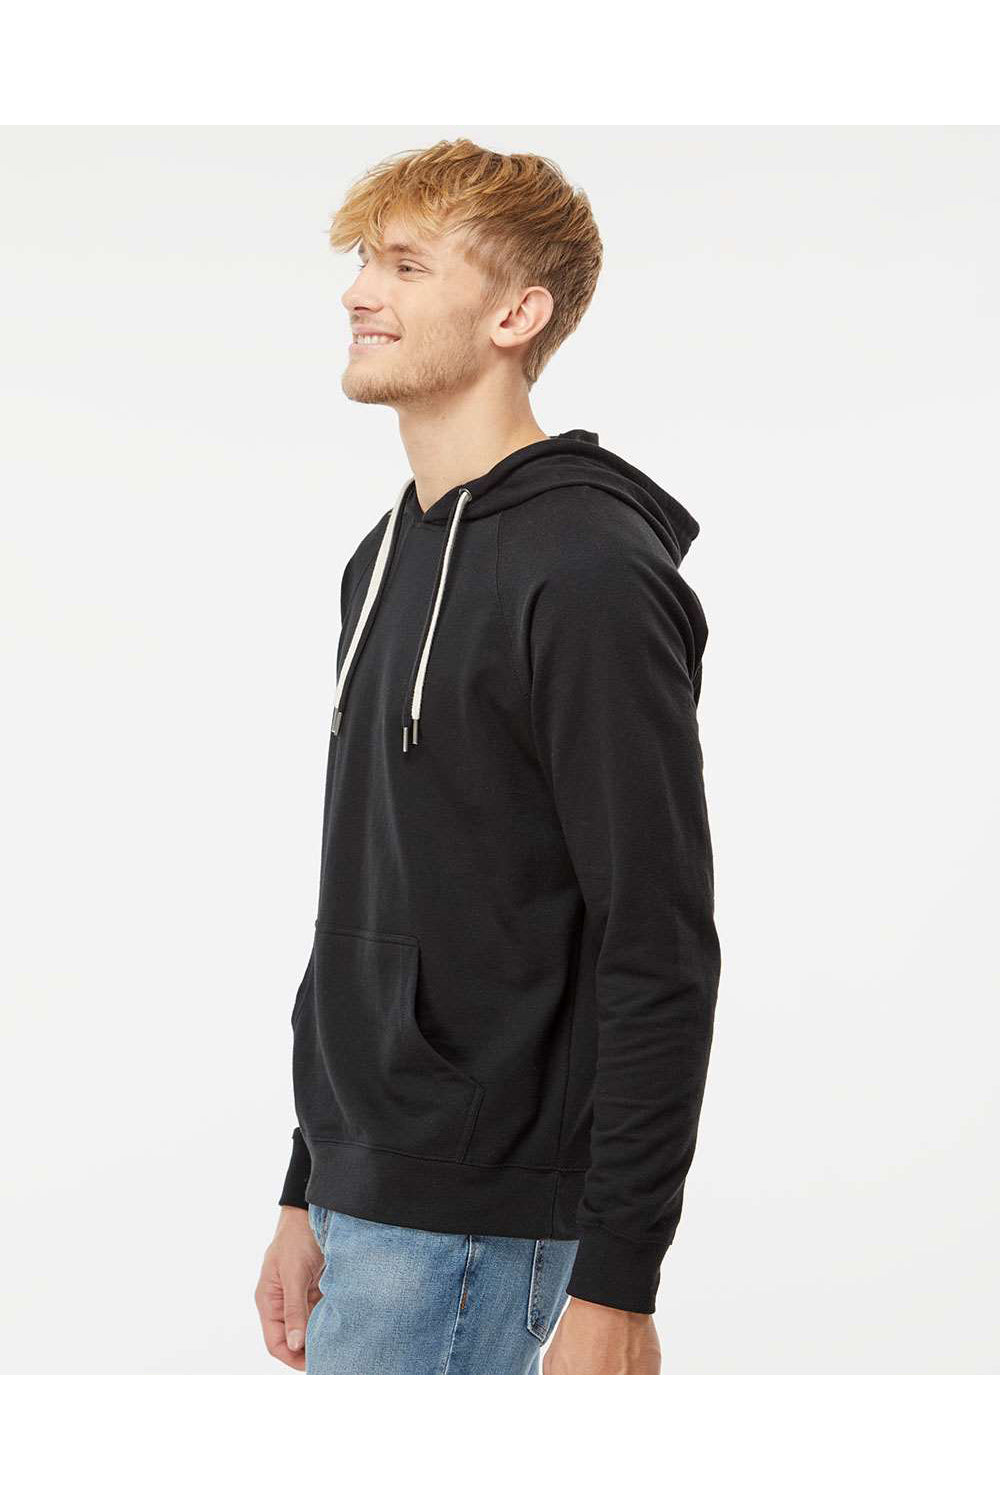 Independent Trading Co. SS1000 Mens Icon Loopback Terry Hooded Sweatshirt Hoodie Black Model Side